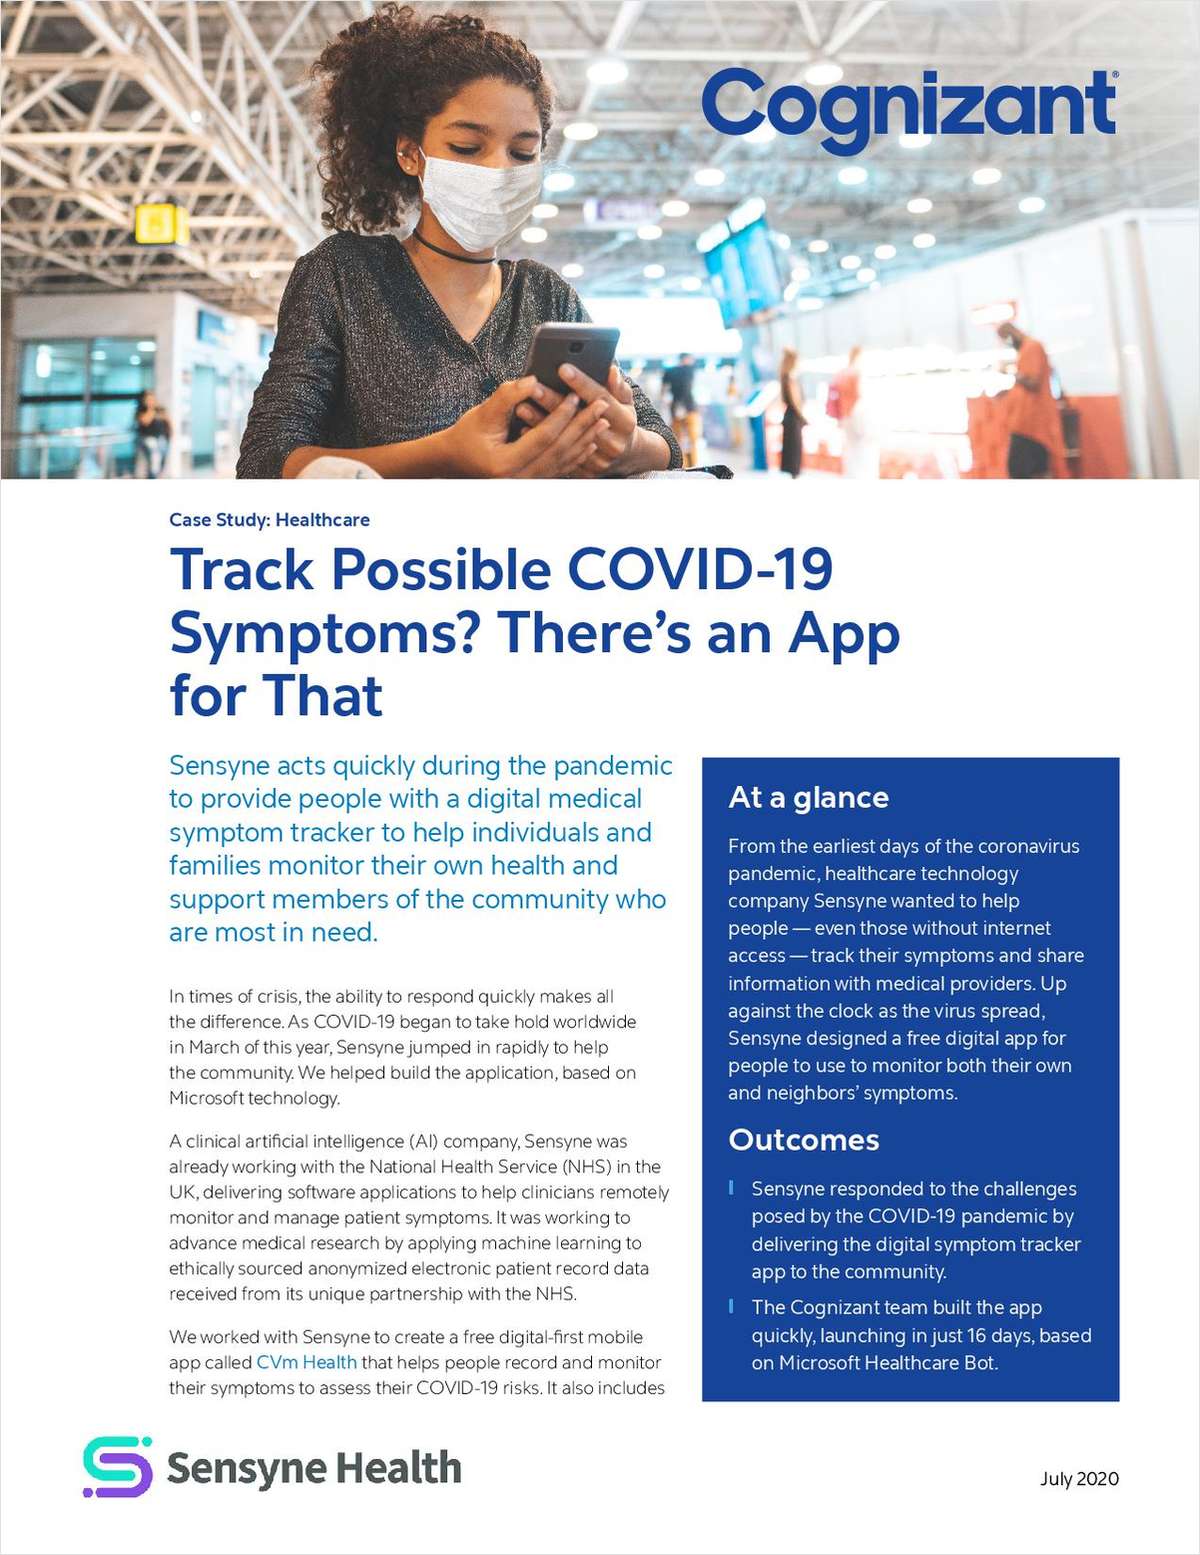 How is Digital Technology Aiding Medical Professionals and Covid-19 Patients?